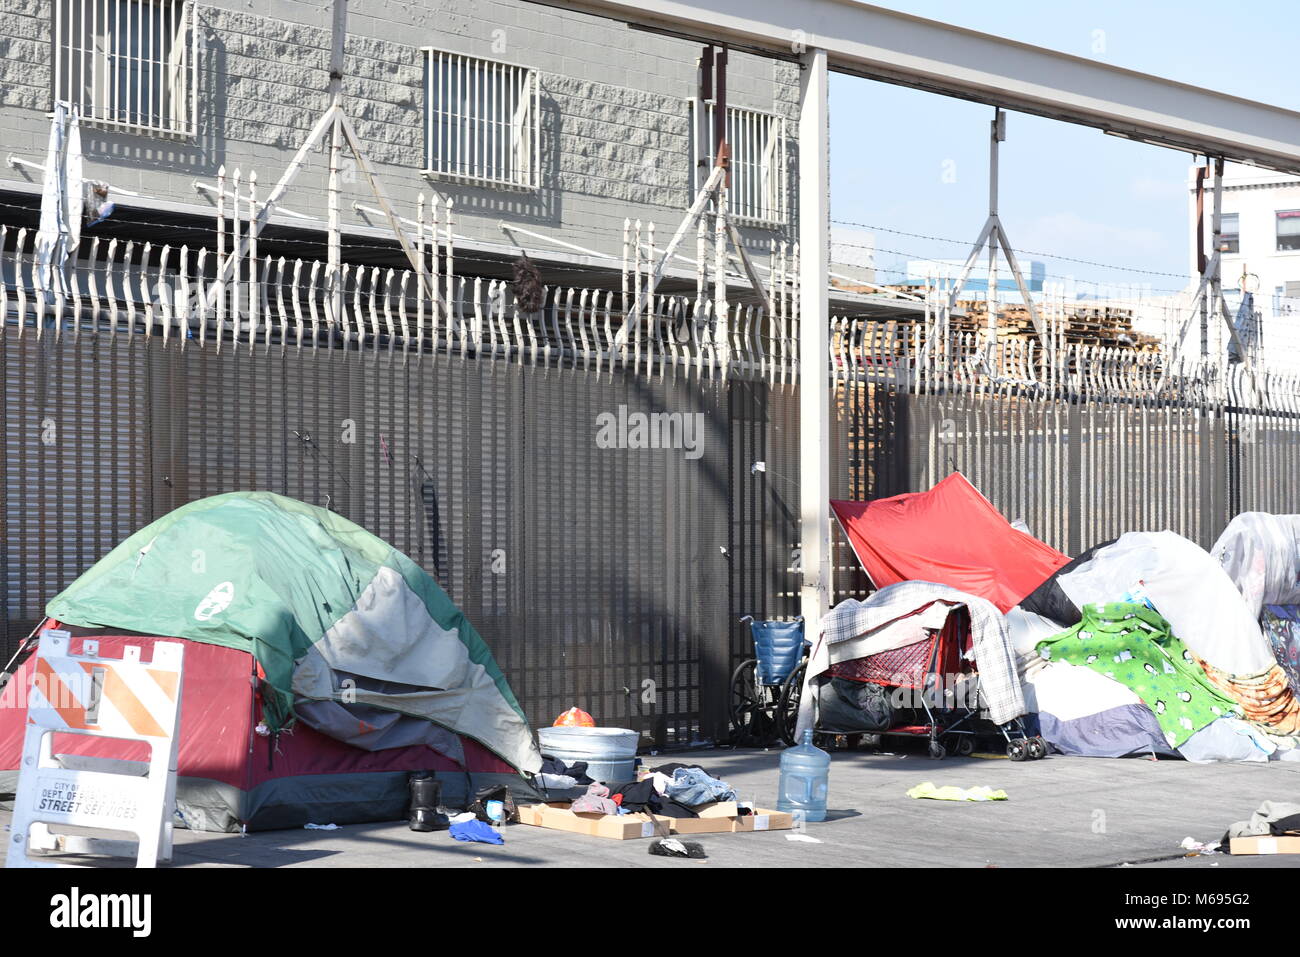 Scenes from Skid Row an area of Downtown Los Angeles which is one of the largest stable populations (between 5,000 and 8,000) of homeless people. Stock Photo